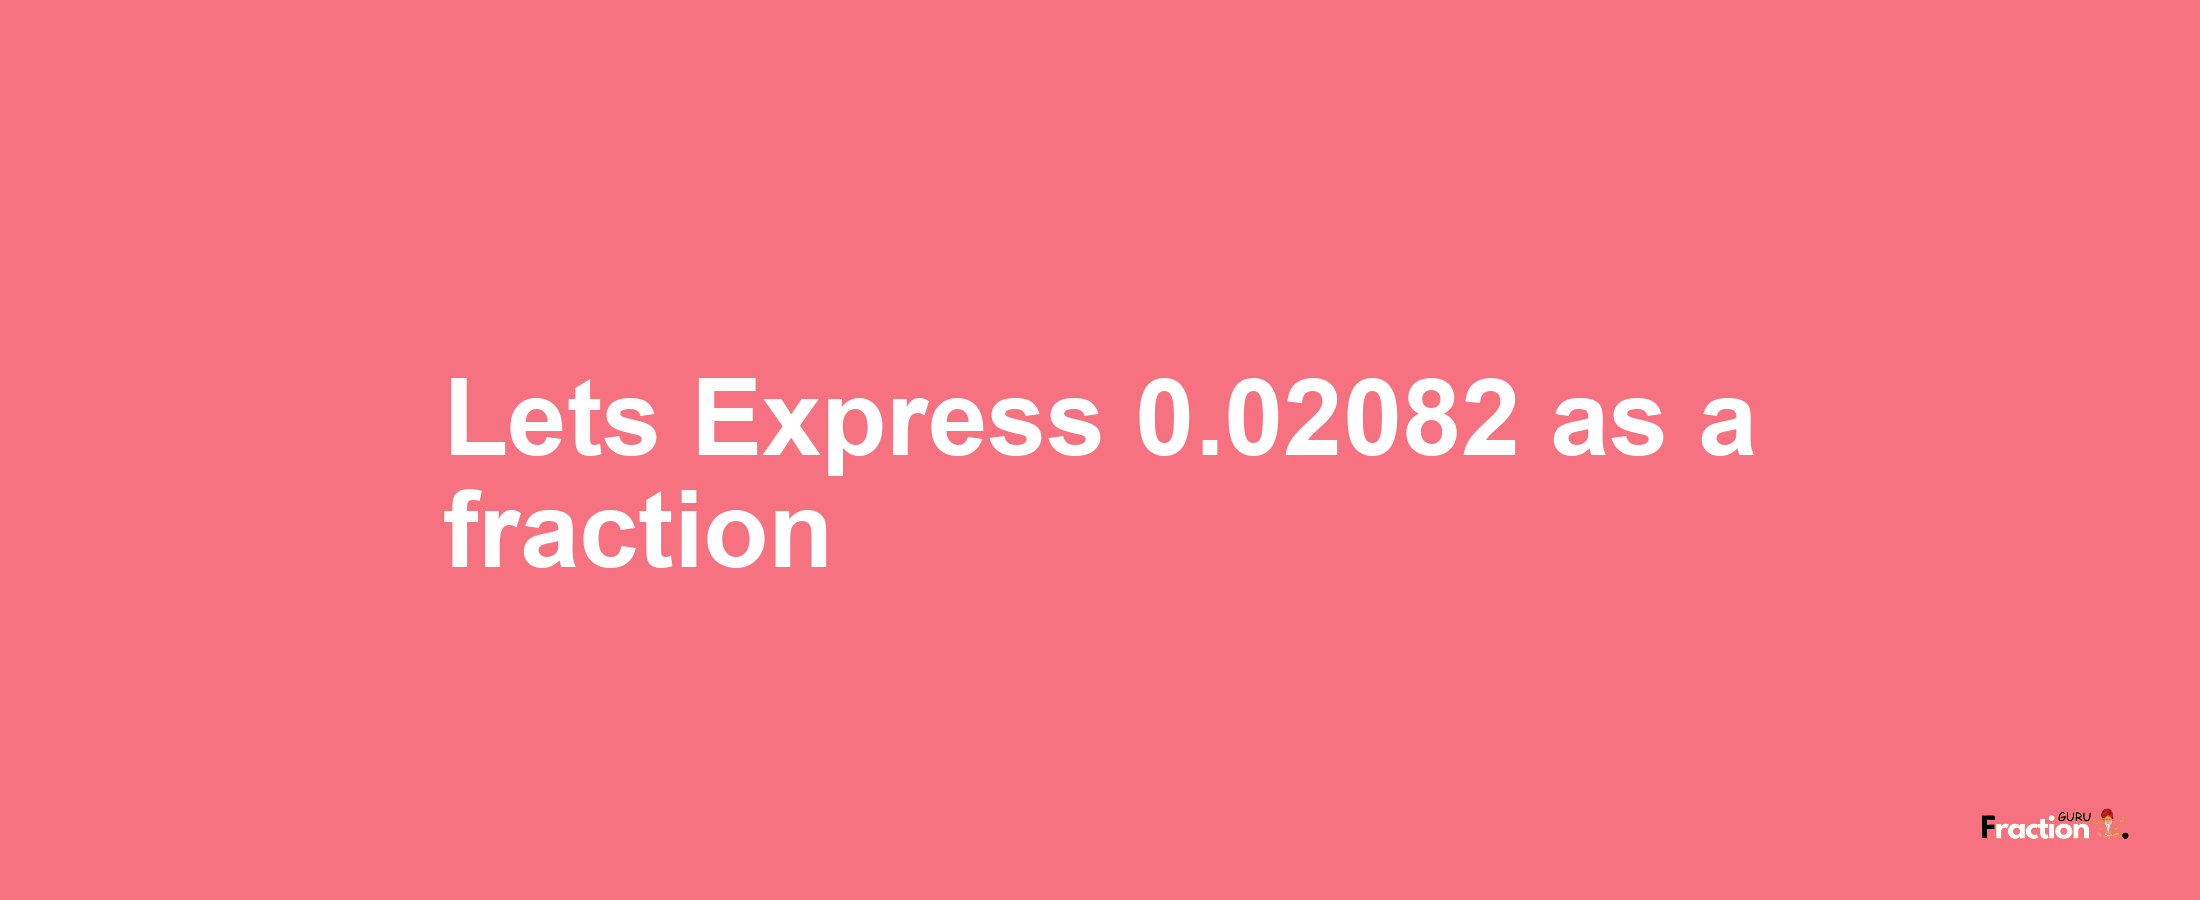 Lets Express 0.02082 as afraction